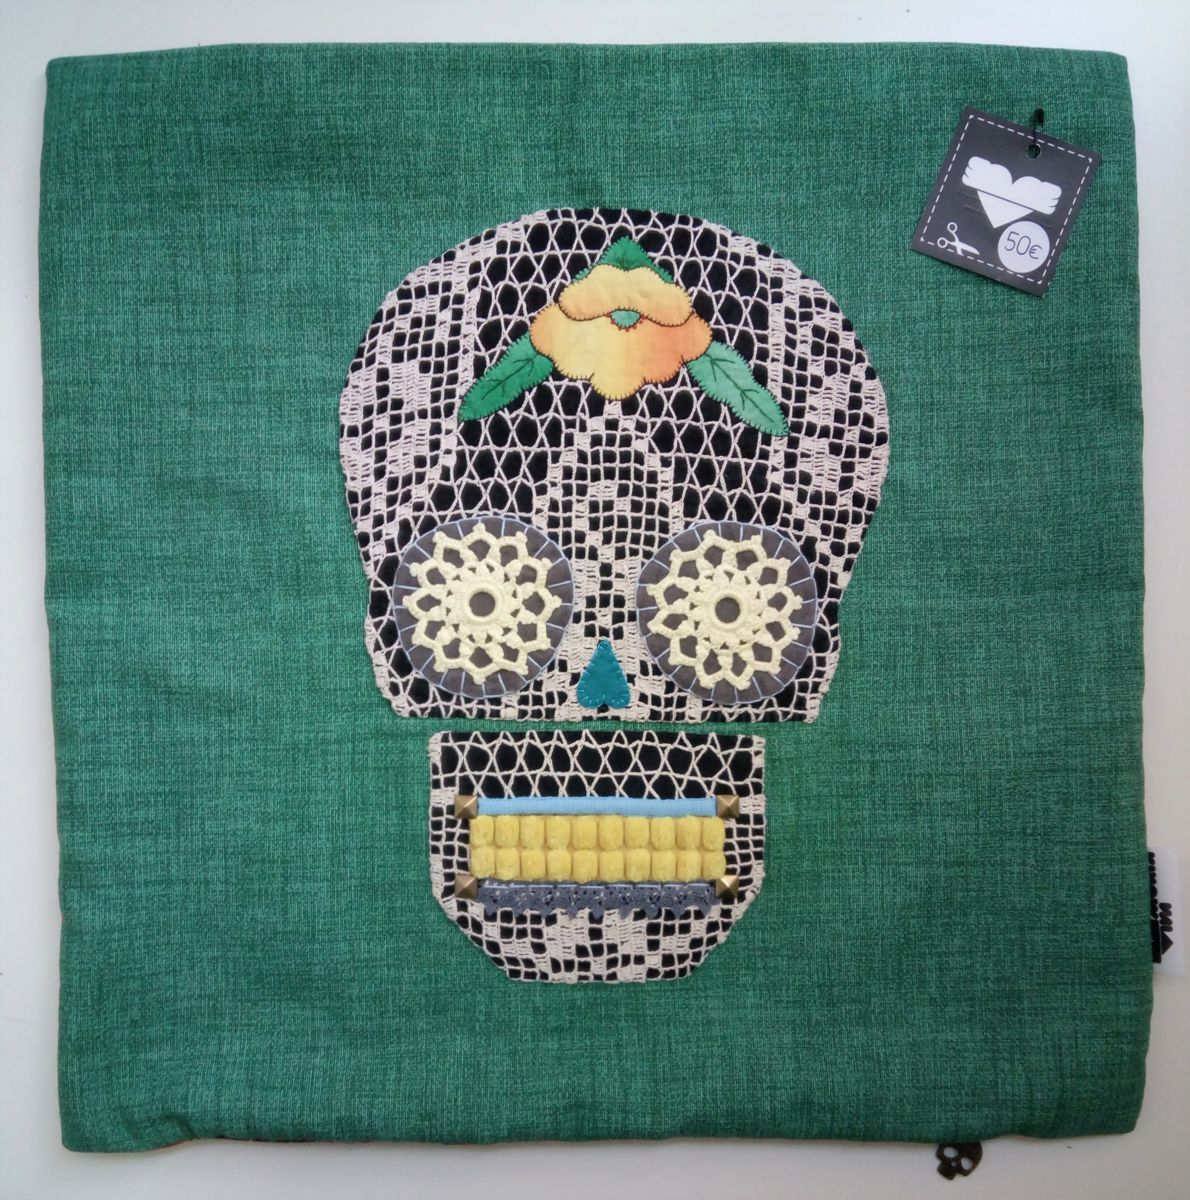 Day Of The Dead Embroidery Patterns Unique Handstiched Mexican Skull Pillow Case Textile Art Memria